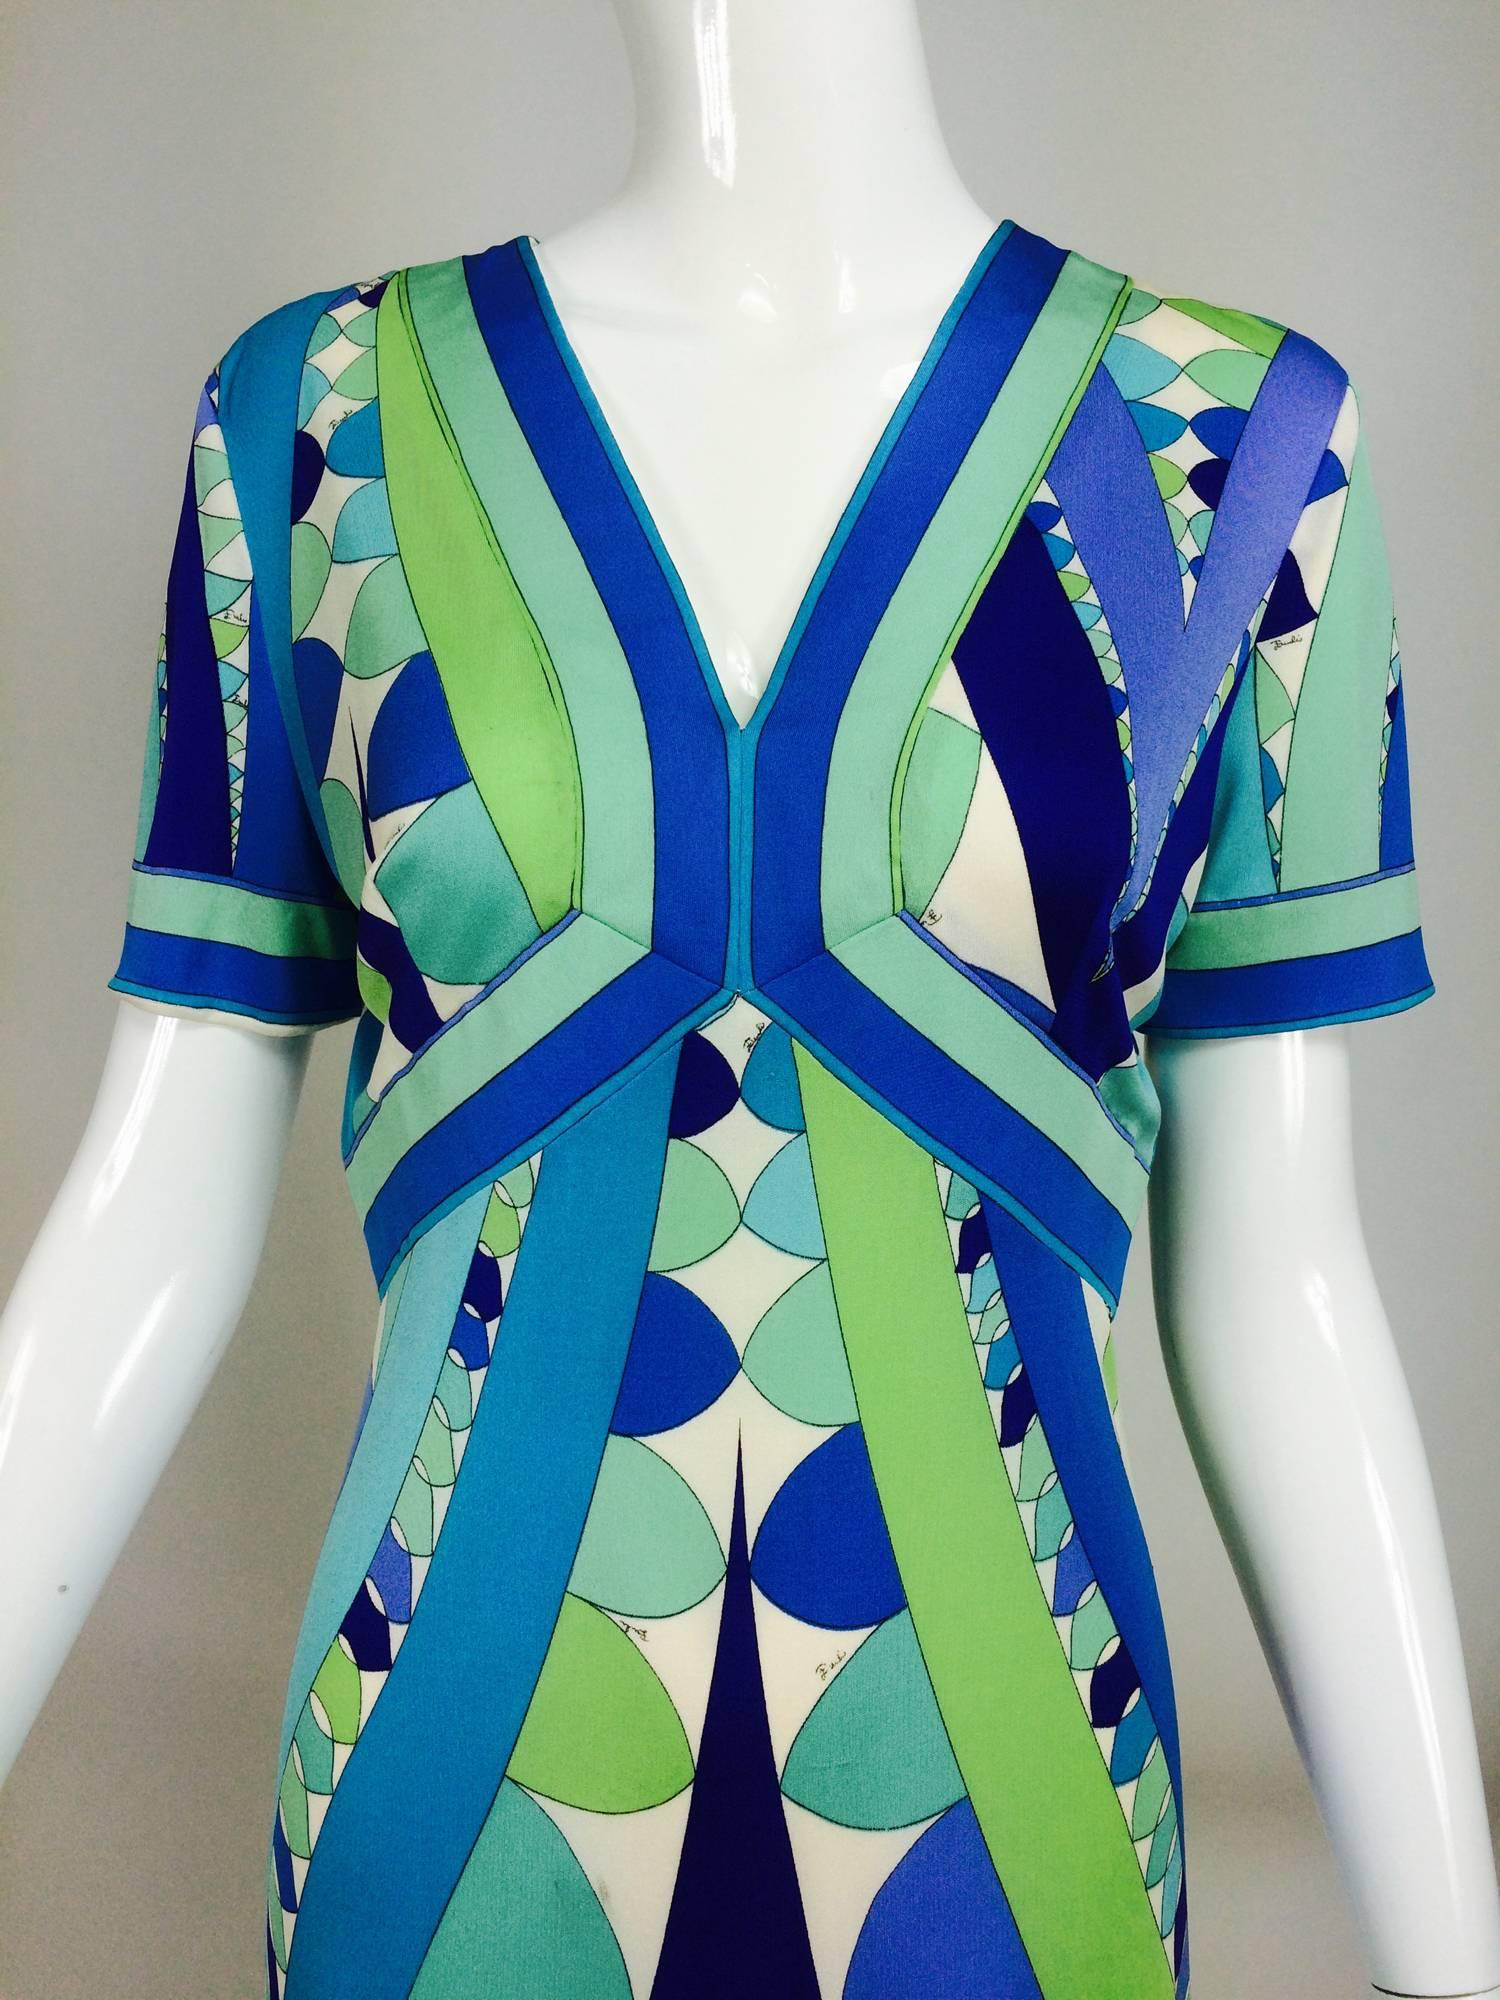 Vintage Emilio Pucci Vivara blue green aqua silk jersey print dress 1960s...Coveted print in Mediterranean blues & greens with purple & white for contrast...Short sleeve V neck dress is fitted through the waist and flares to the